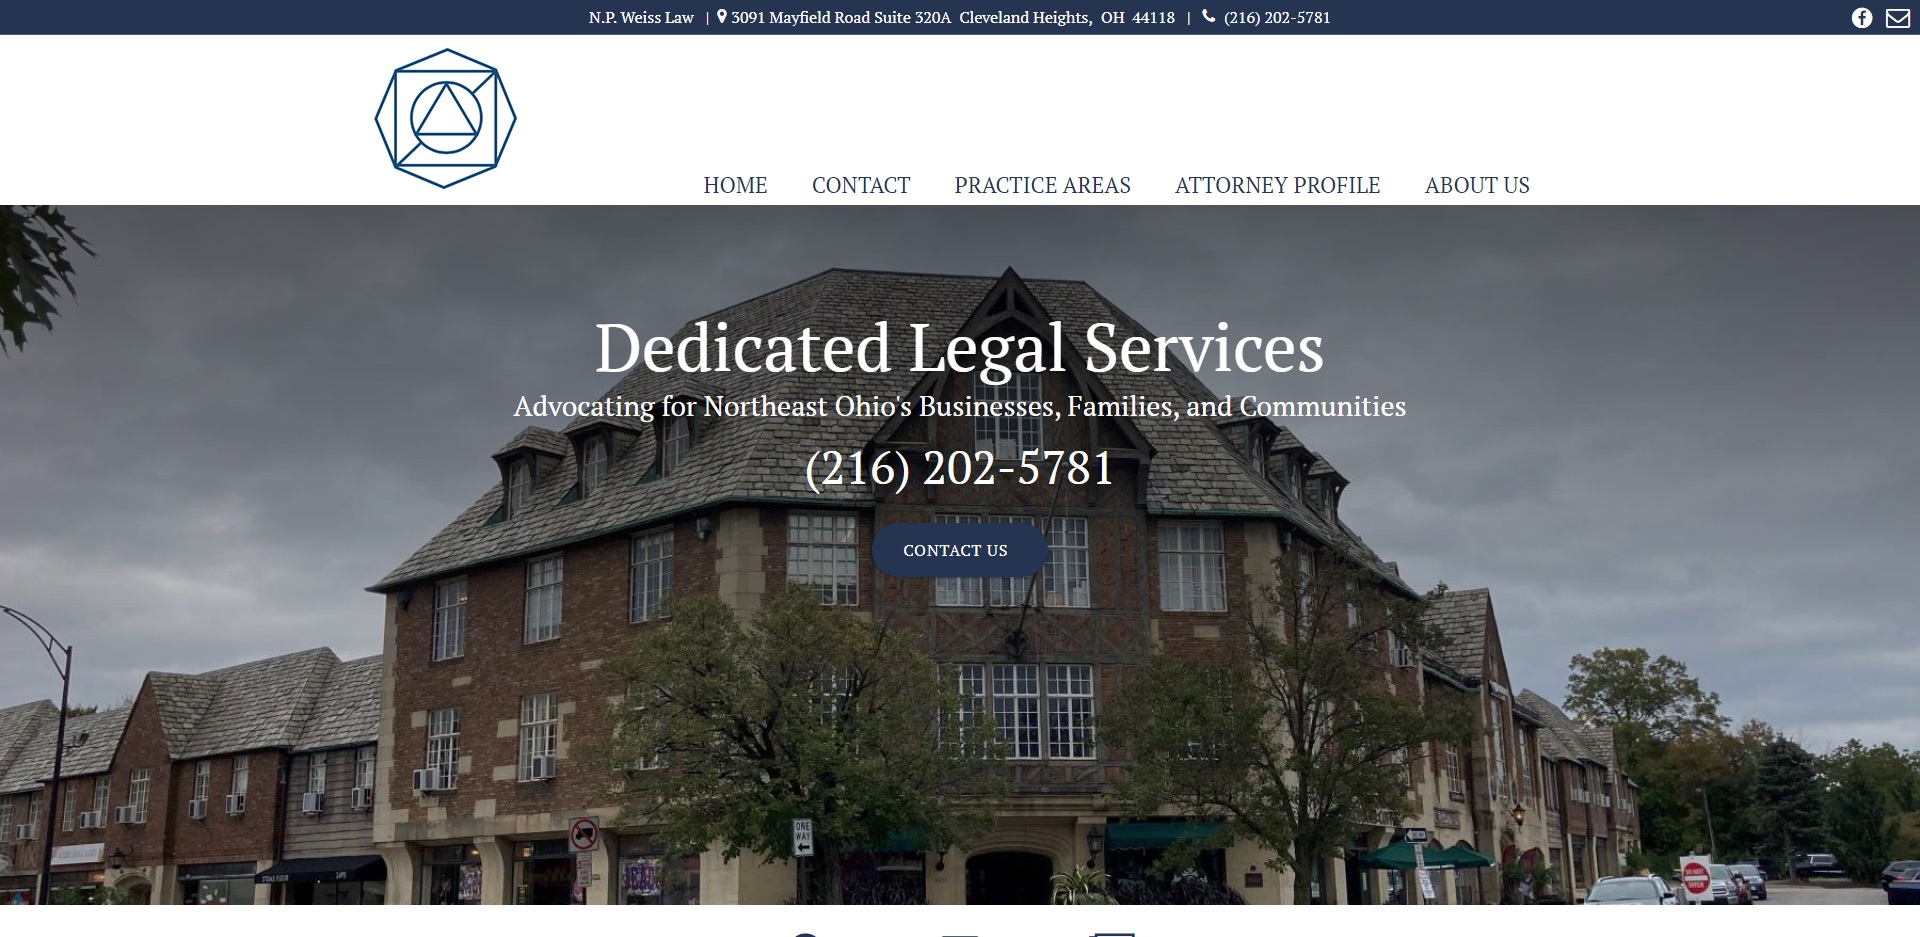 The Best Property Attorneys in Cleveland, OH